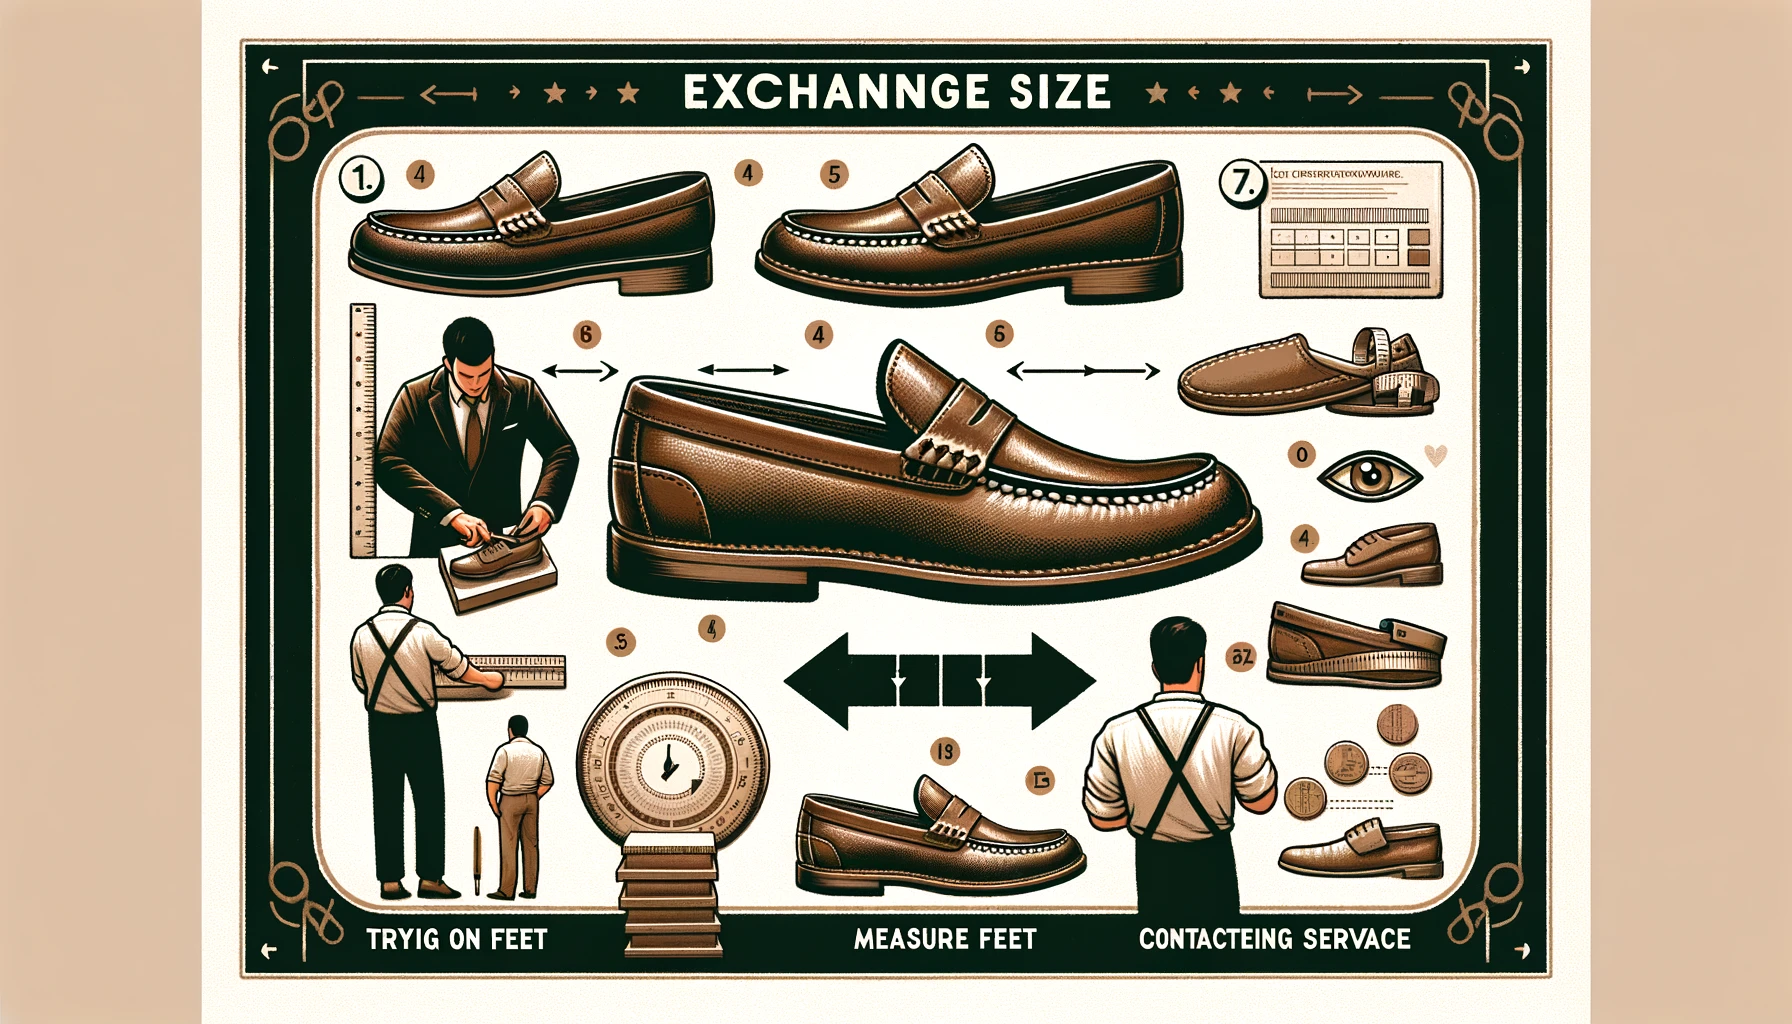 A detailed visual guide for exchanging the size of G.H.BASS leather loafers. The image should include steps or icons representing the exchange process, such as trying on shoes, measuring feet, and contacting customer service. The background should be clean and professional, emphasizing clarity and ease of understanding. Include the text 'G.H.BASS' prominently in the image.